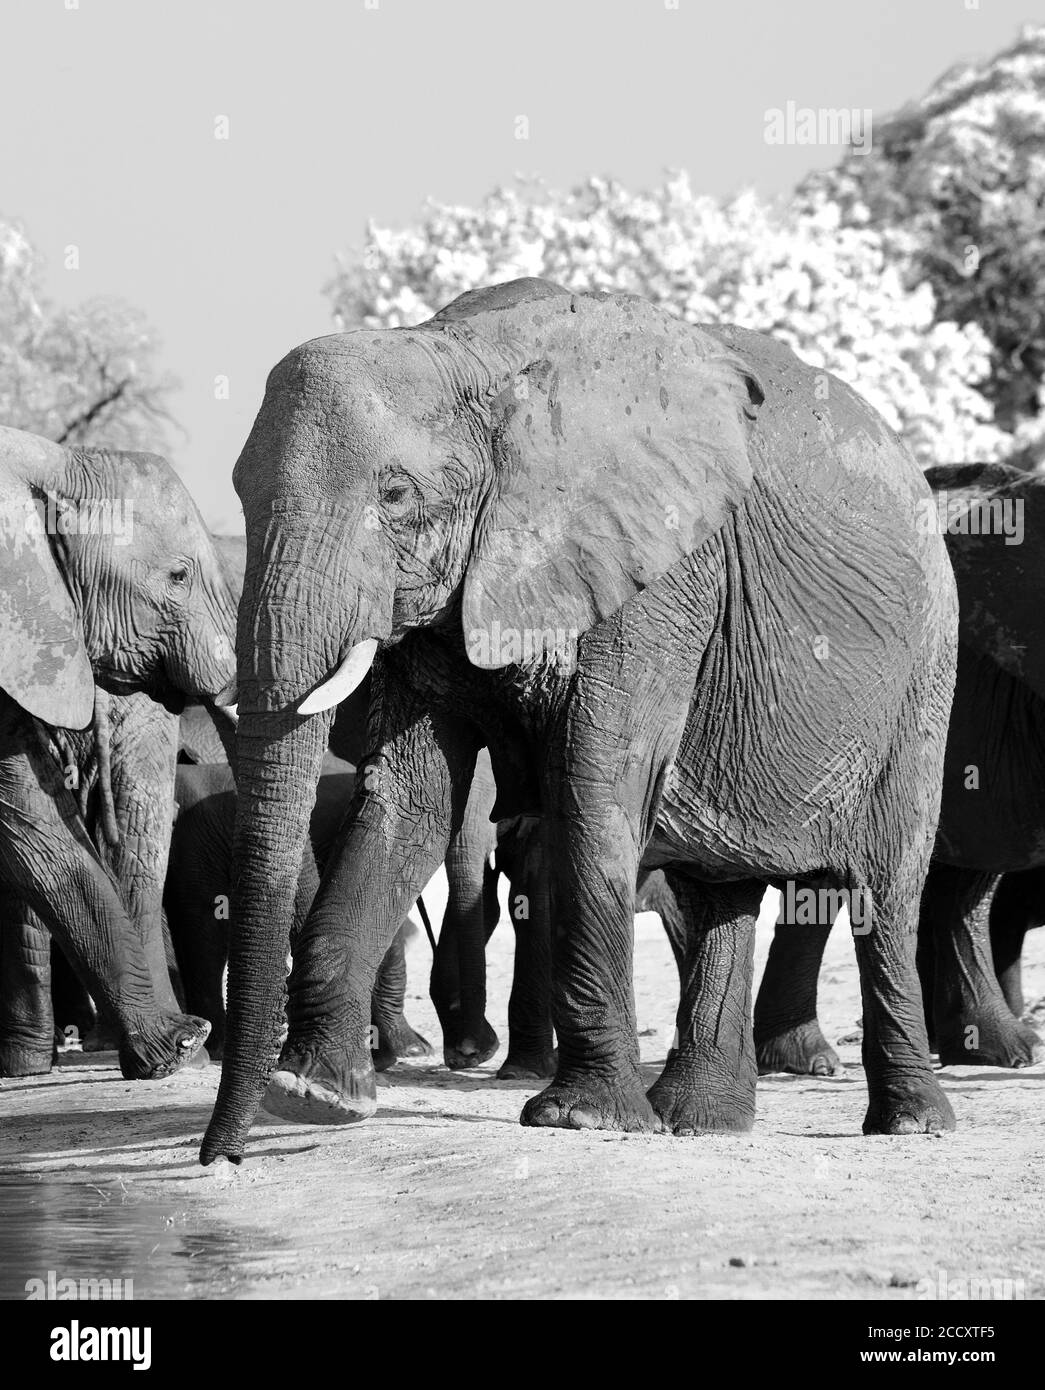 Black and white image of a large African Elephant at a waterhole in Hwange National Park, Zimbabwe Stock Photo